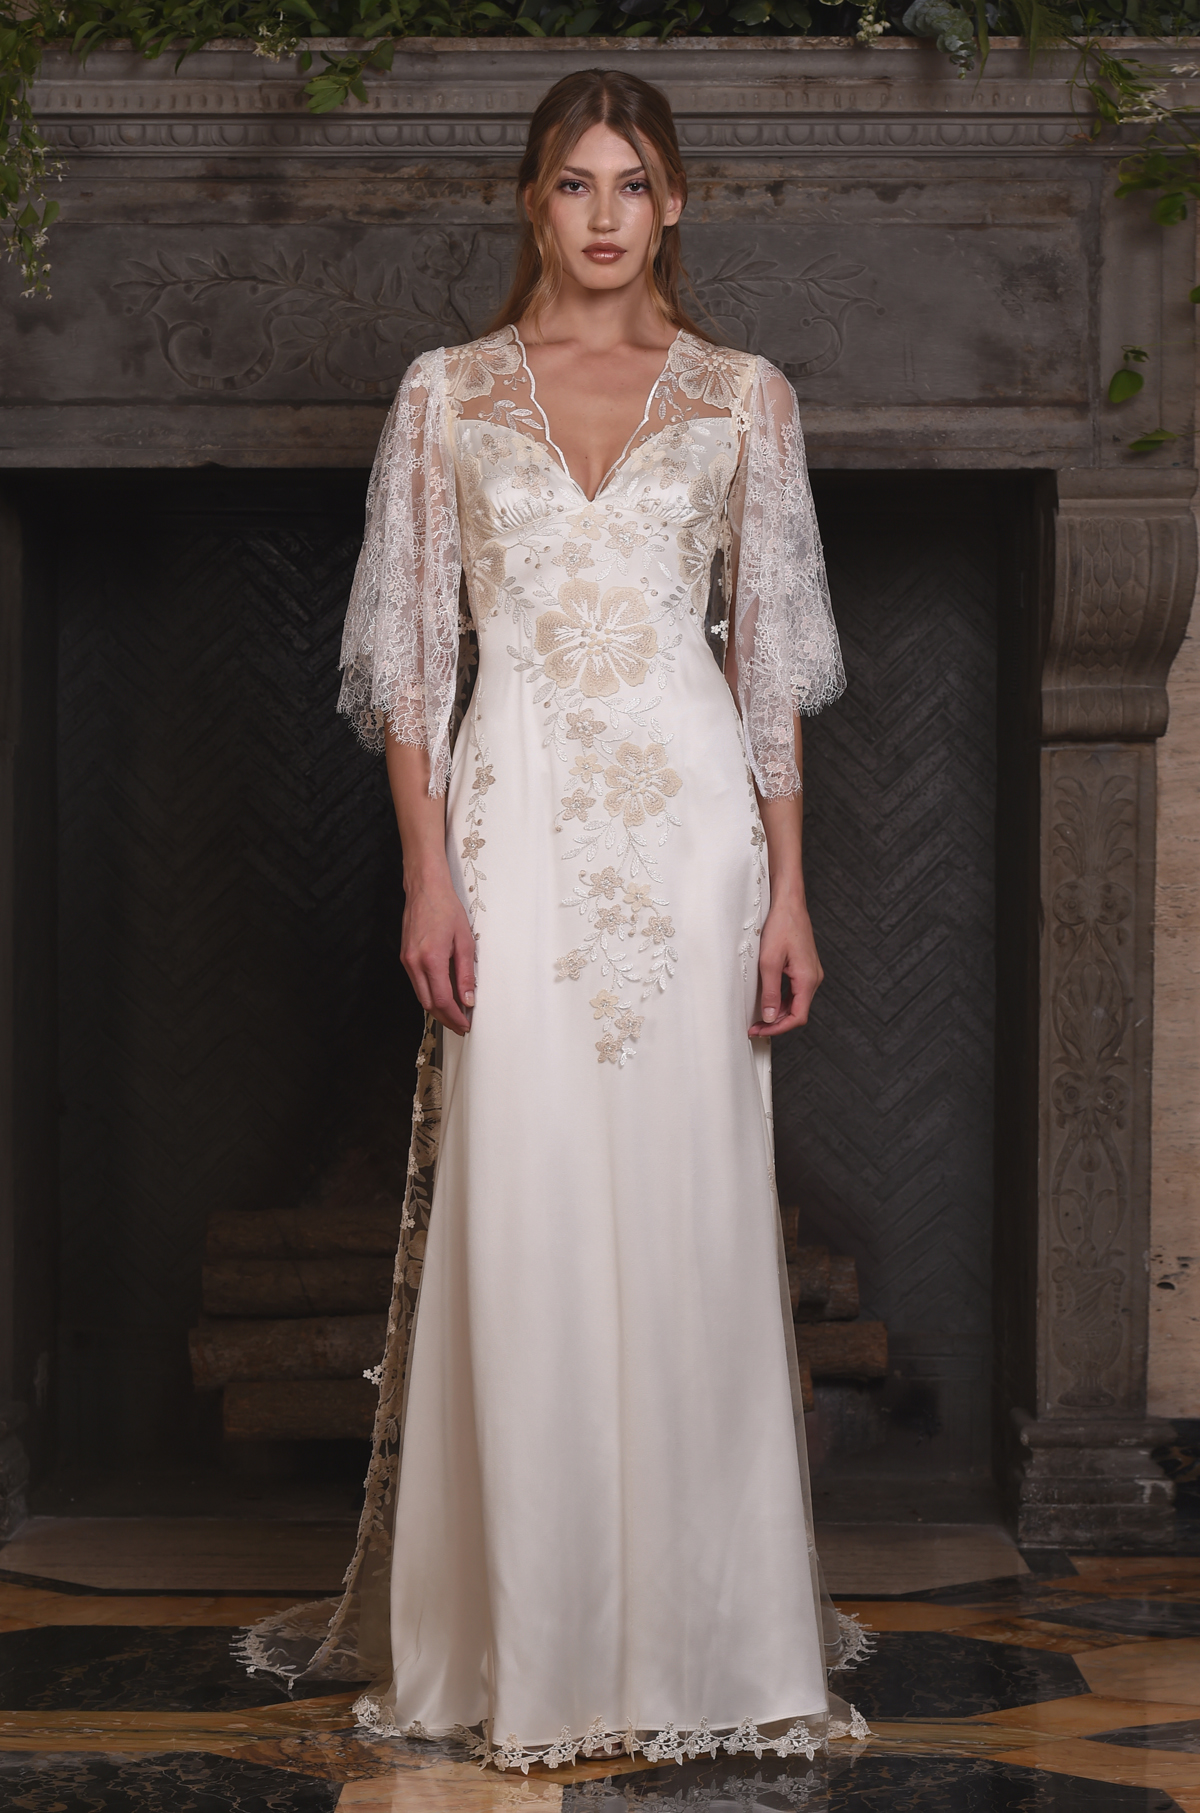 The Reverie gown, from Claire Pettibone's 'The Four Seasons' bridal couture collection for 2017.